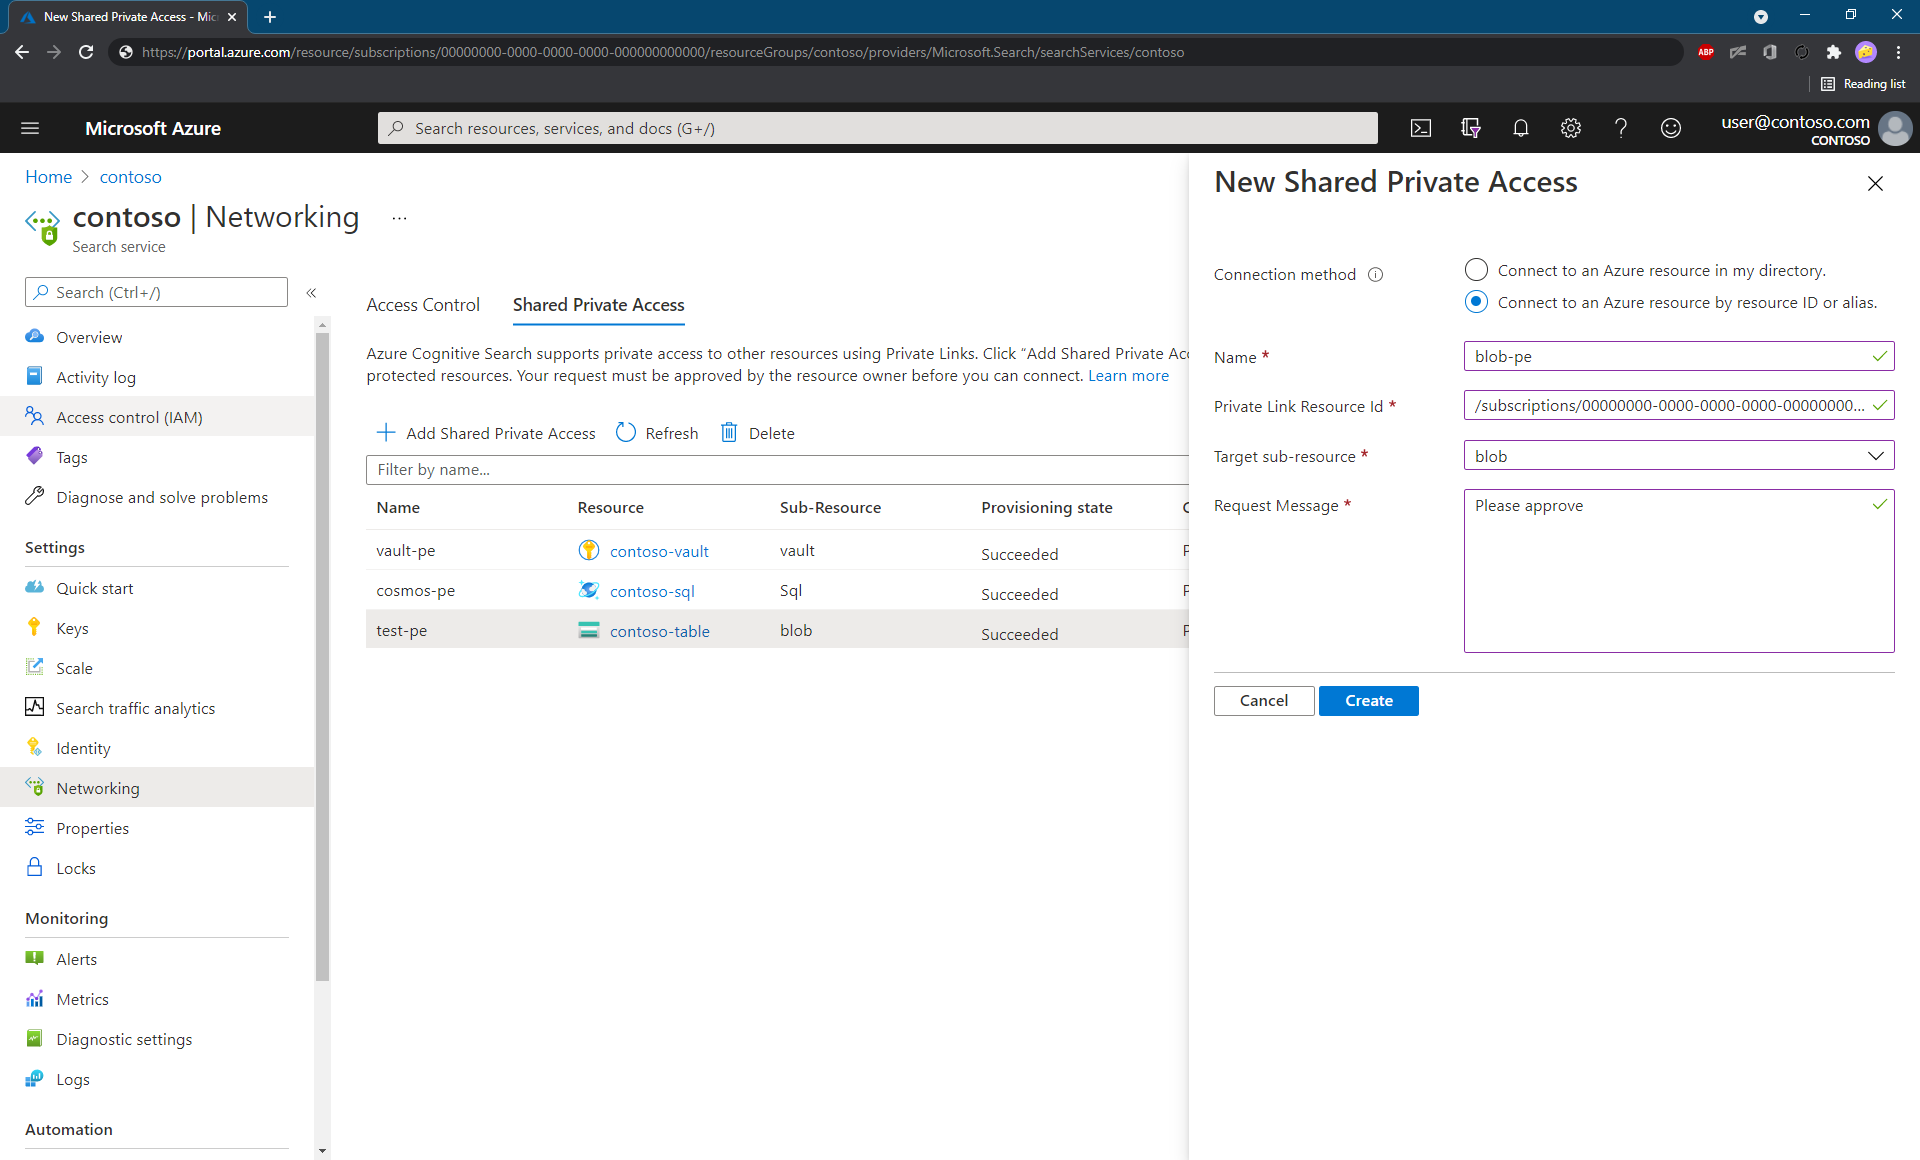 Screenshot of the "Add Shared Private Access" pane, showing the manual experience for creating a shared private link resource. 